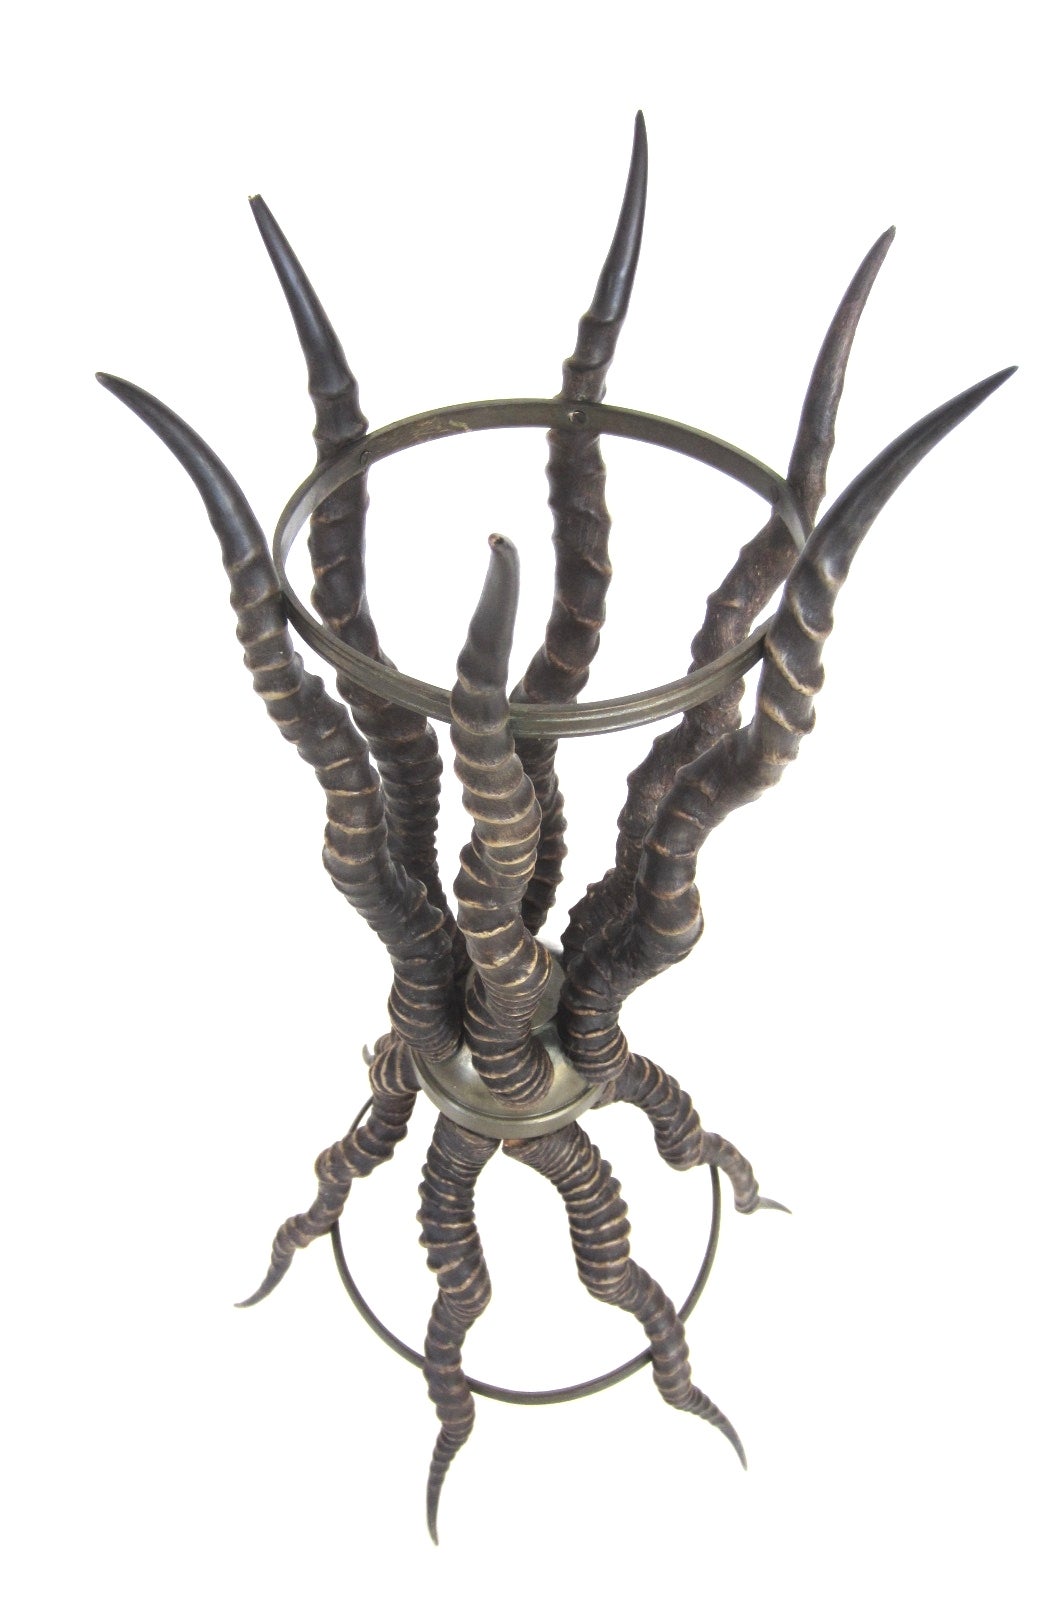 Large circa 1890s Victorian plant pedestal floor stand sculpted of 
12 African gazelle horns affixed to a center bronze ball with bronze rings
at top and bottom.
Could be used to hold an ice bucket.
Solid and well crafted piece in excellent